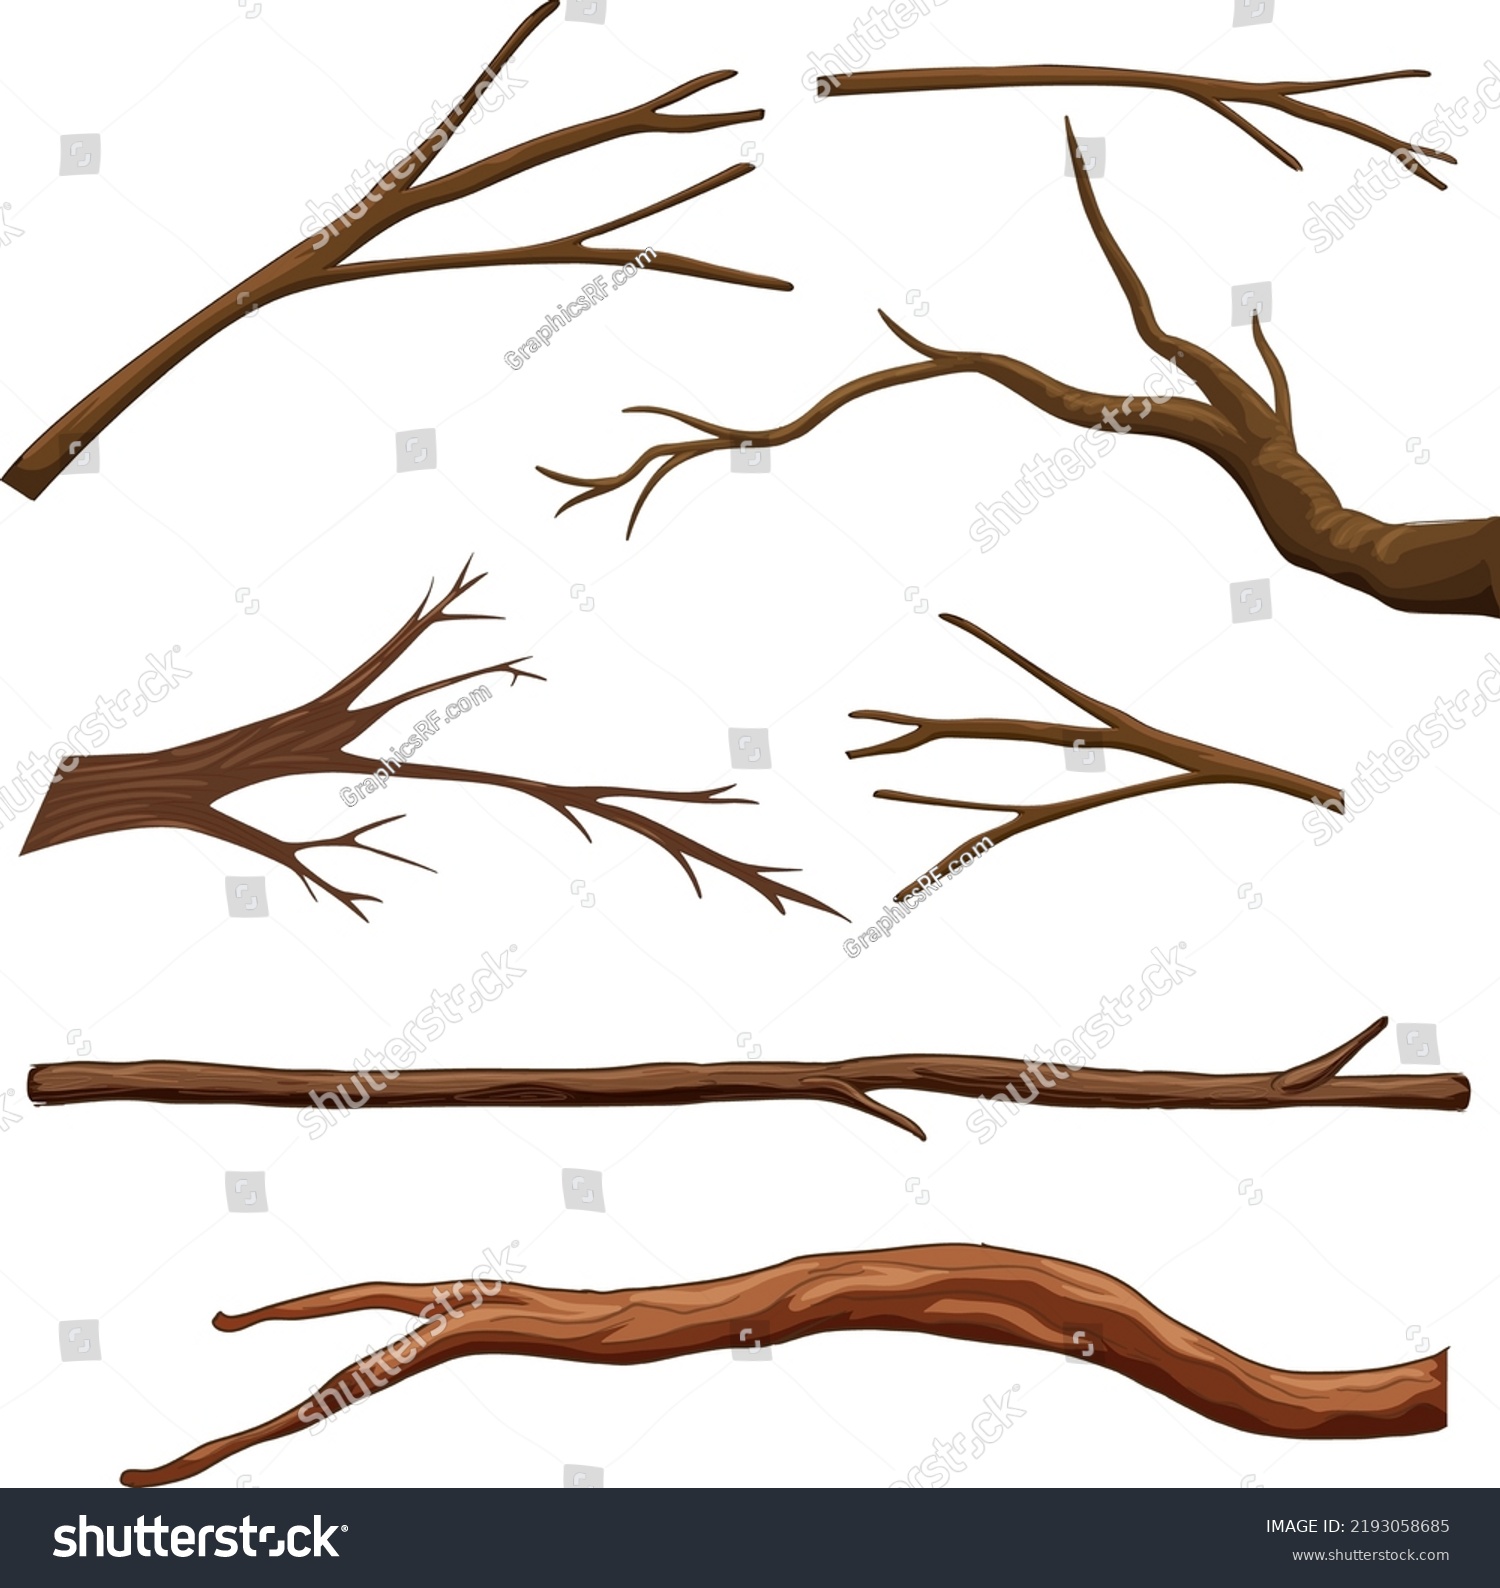 Set of different tree branches isolated illustration #2193058685